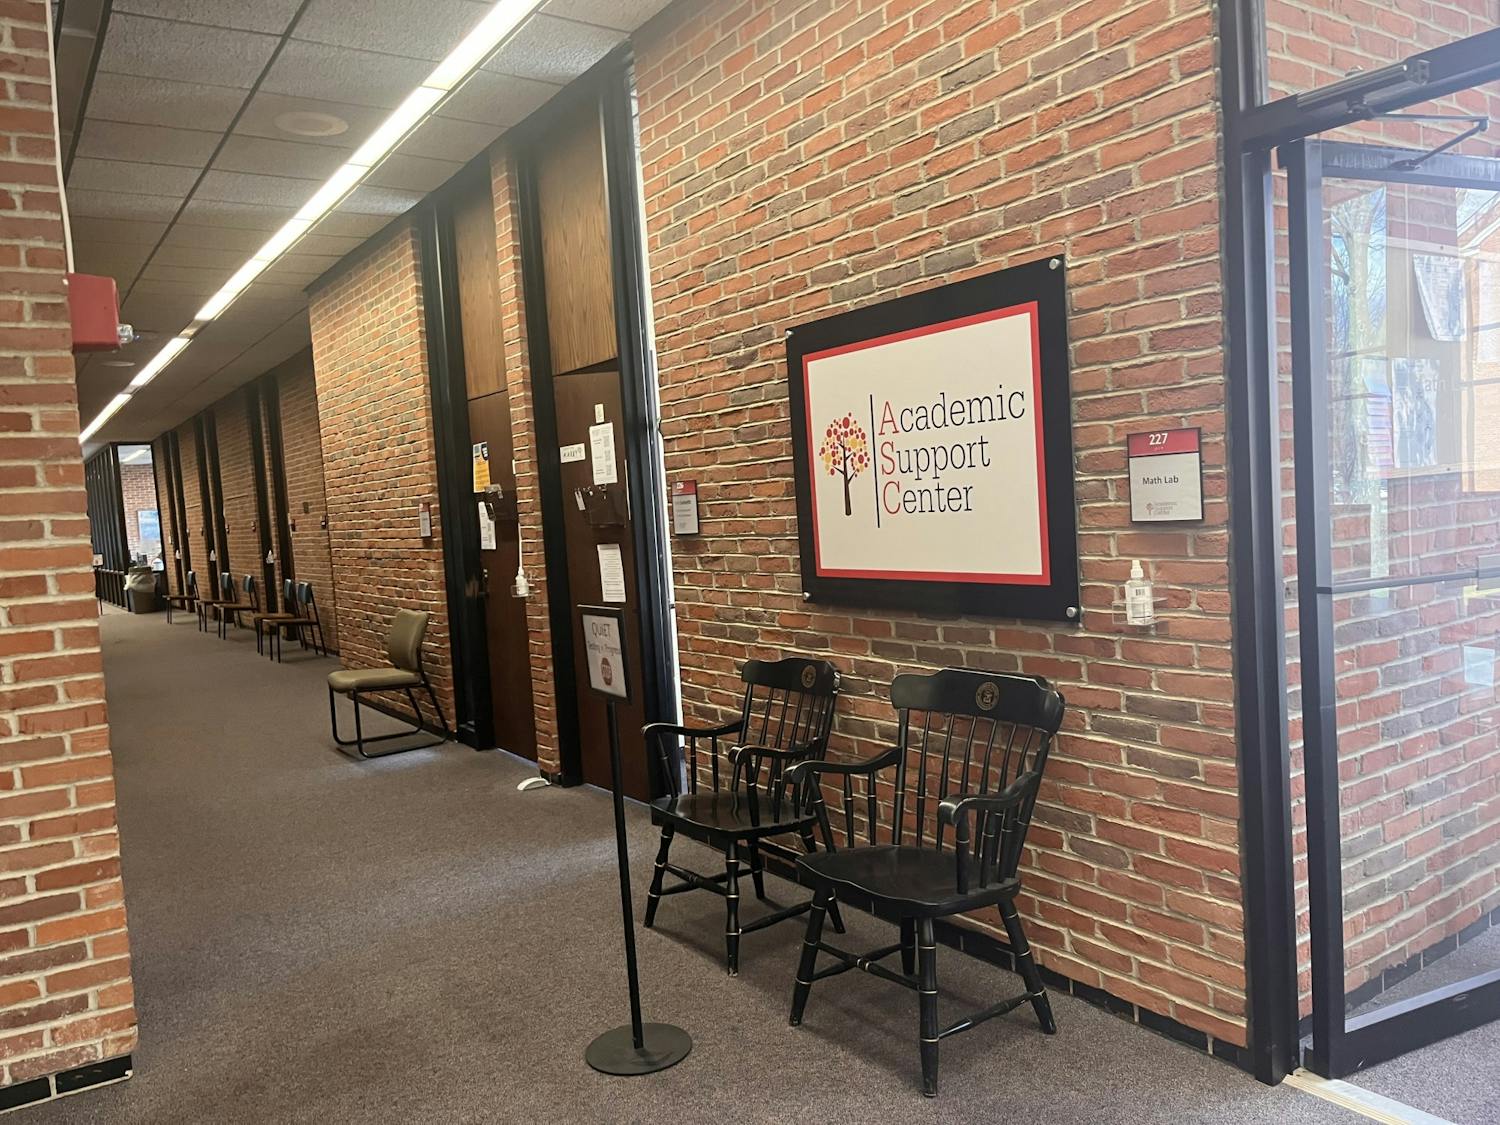 Brick walls surround a hallway with black chairs in them, and a sign that reads "Academic Support Center."